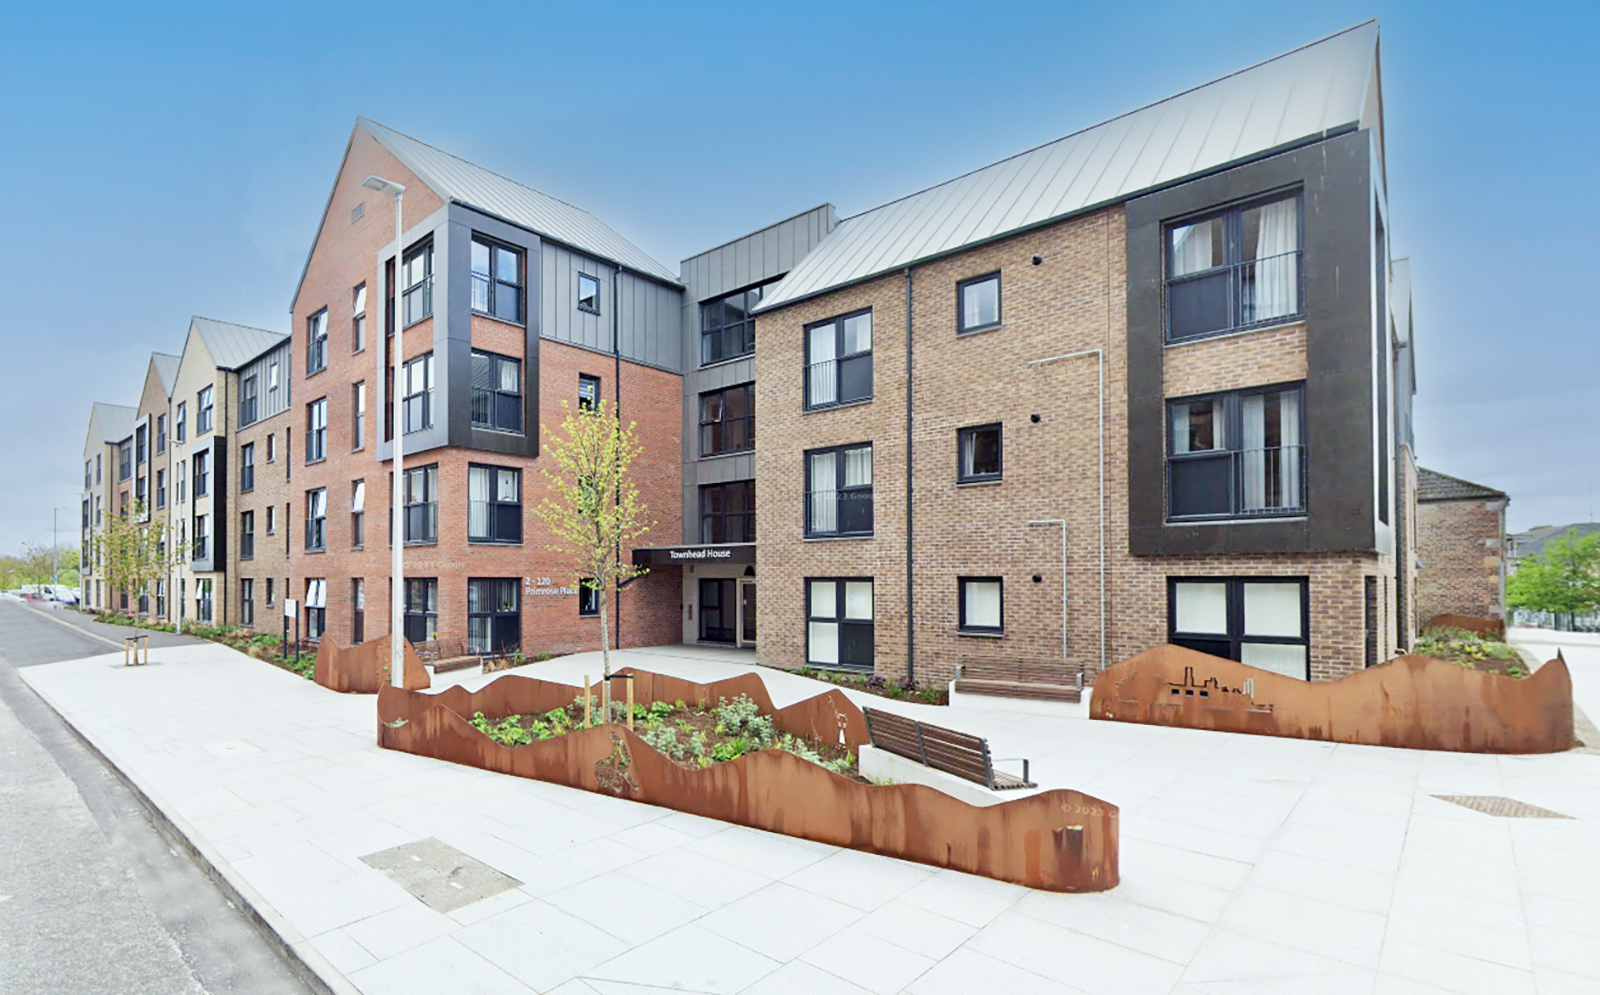 Kingdom takes affordable housing prize at Homes for Scotland Annual Awards